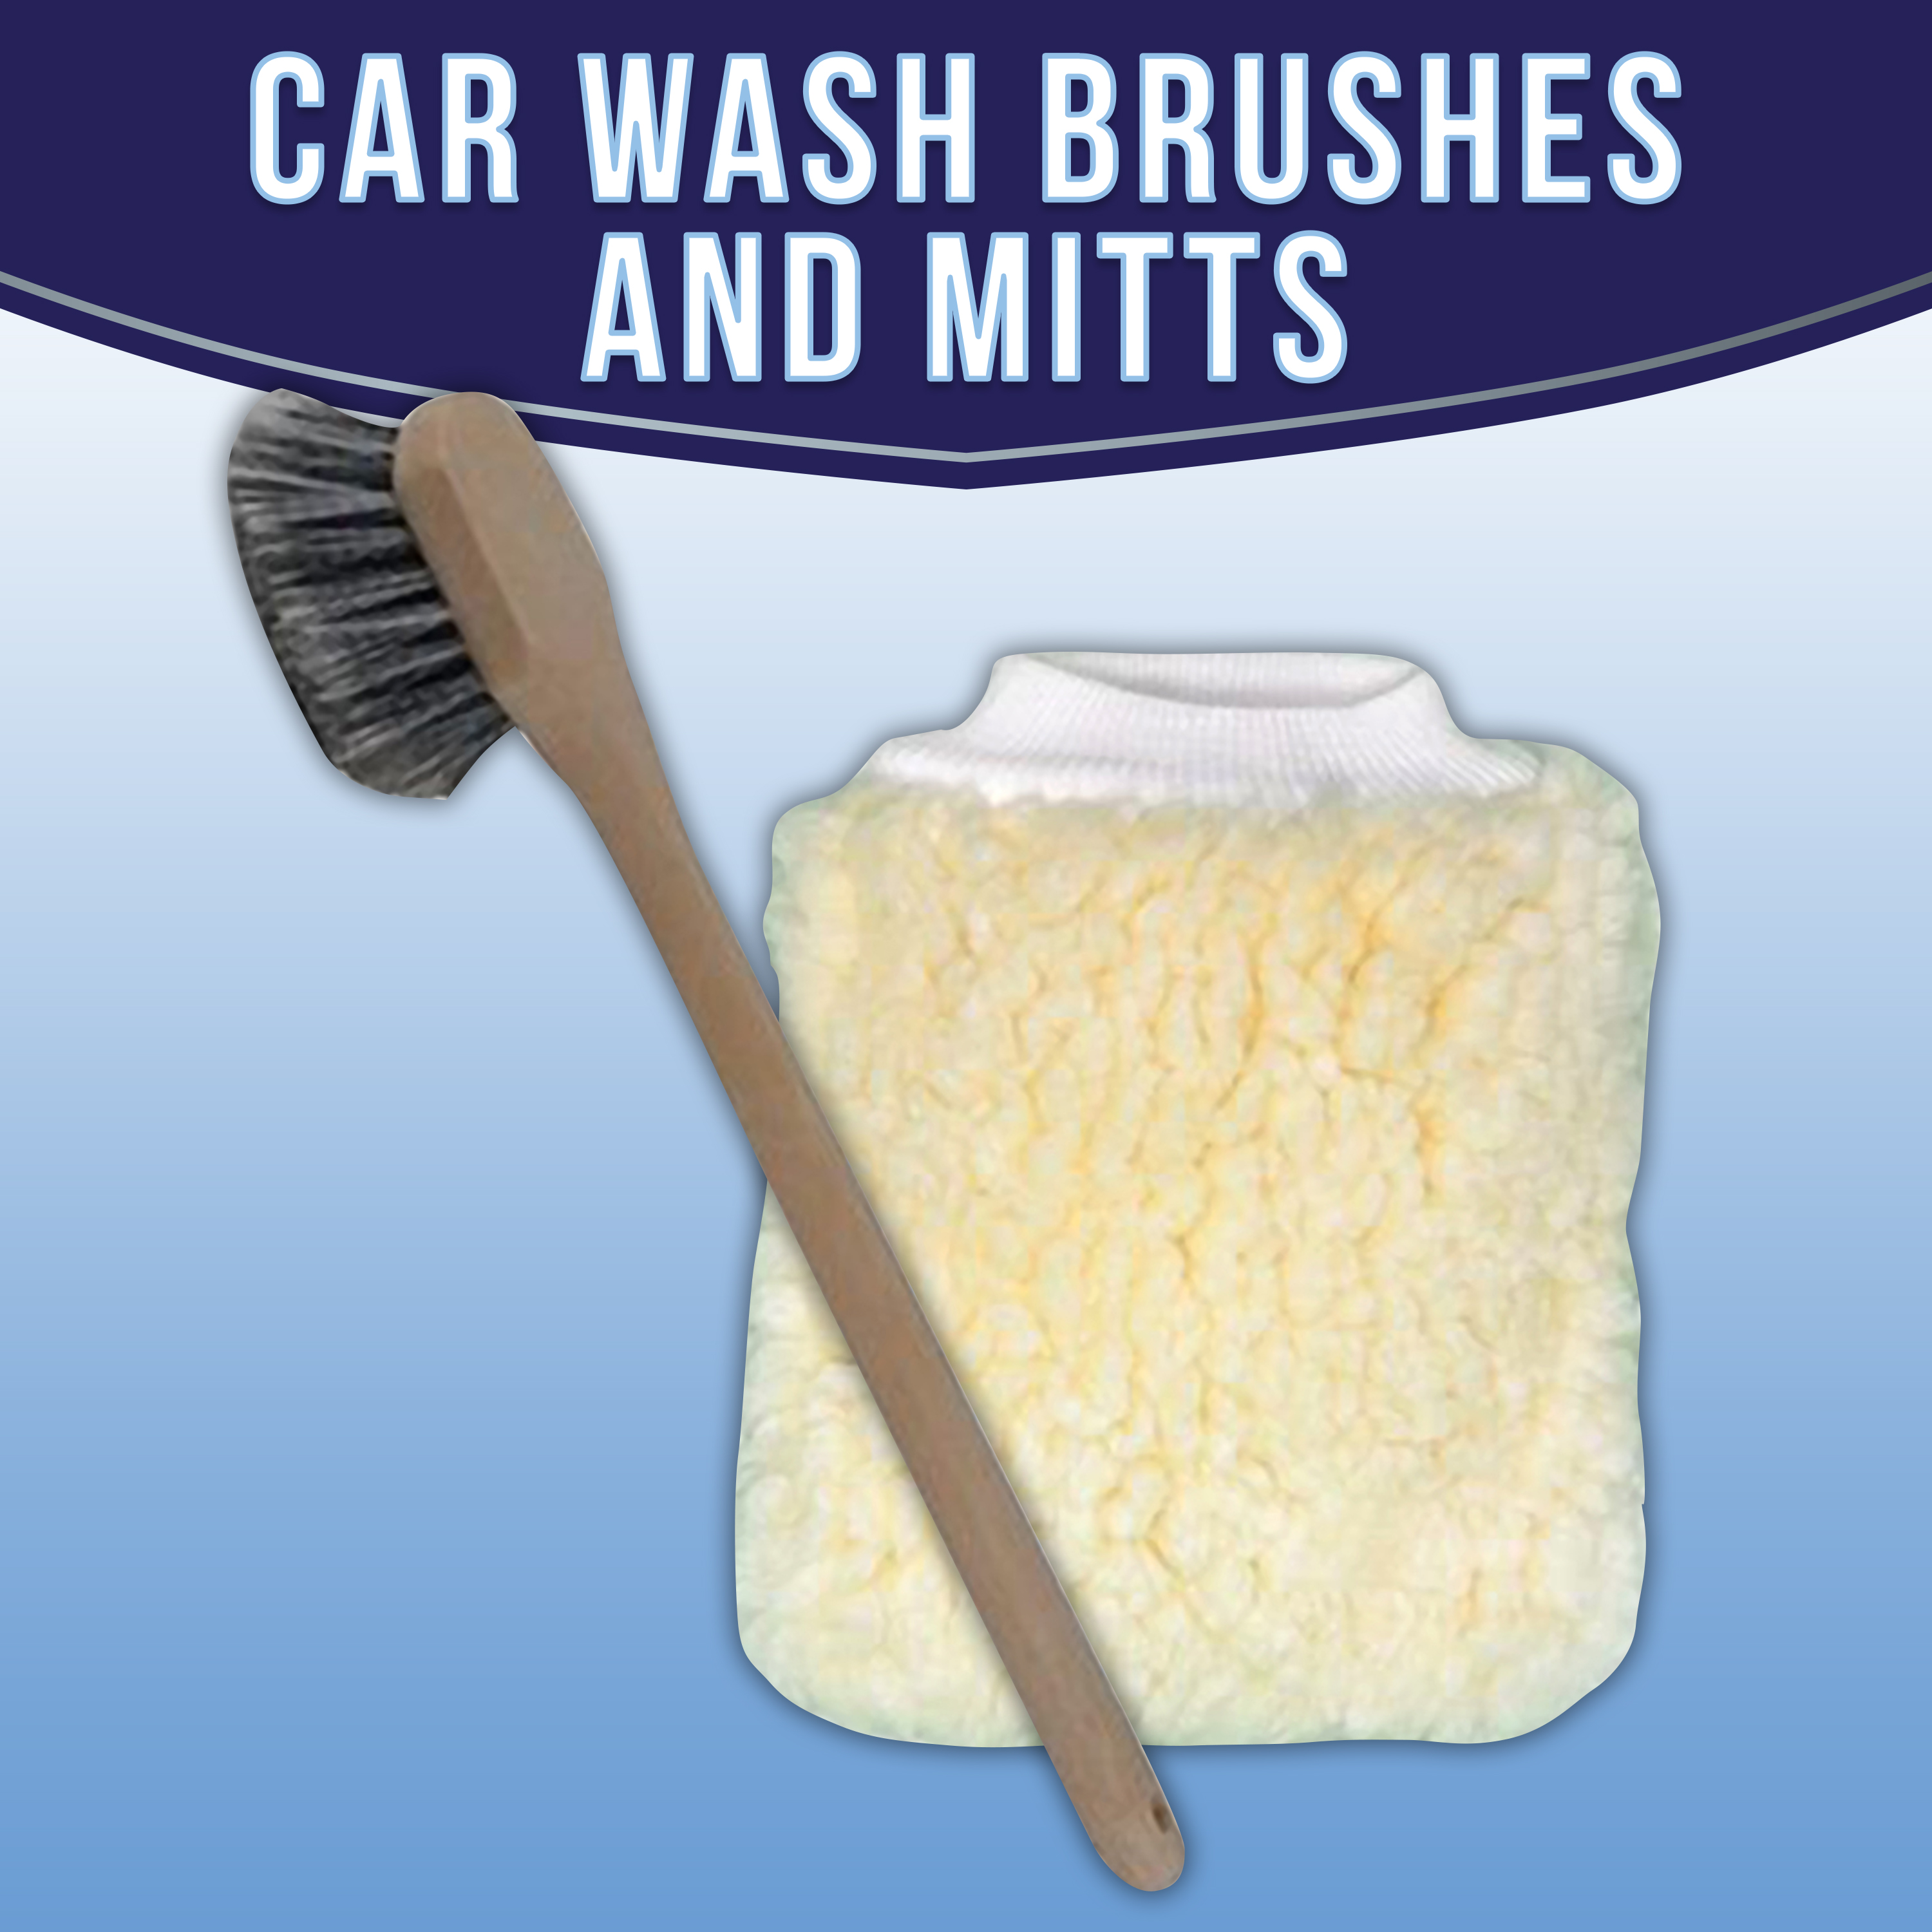 Car Wash Brushes and Mitts